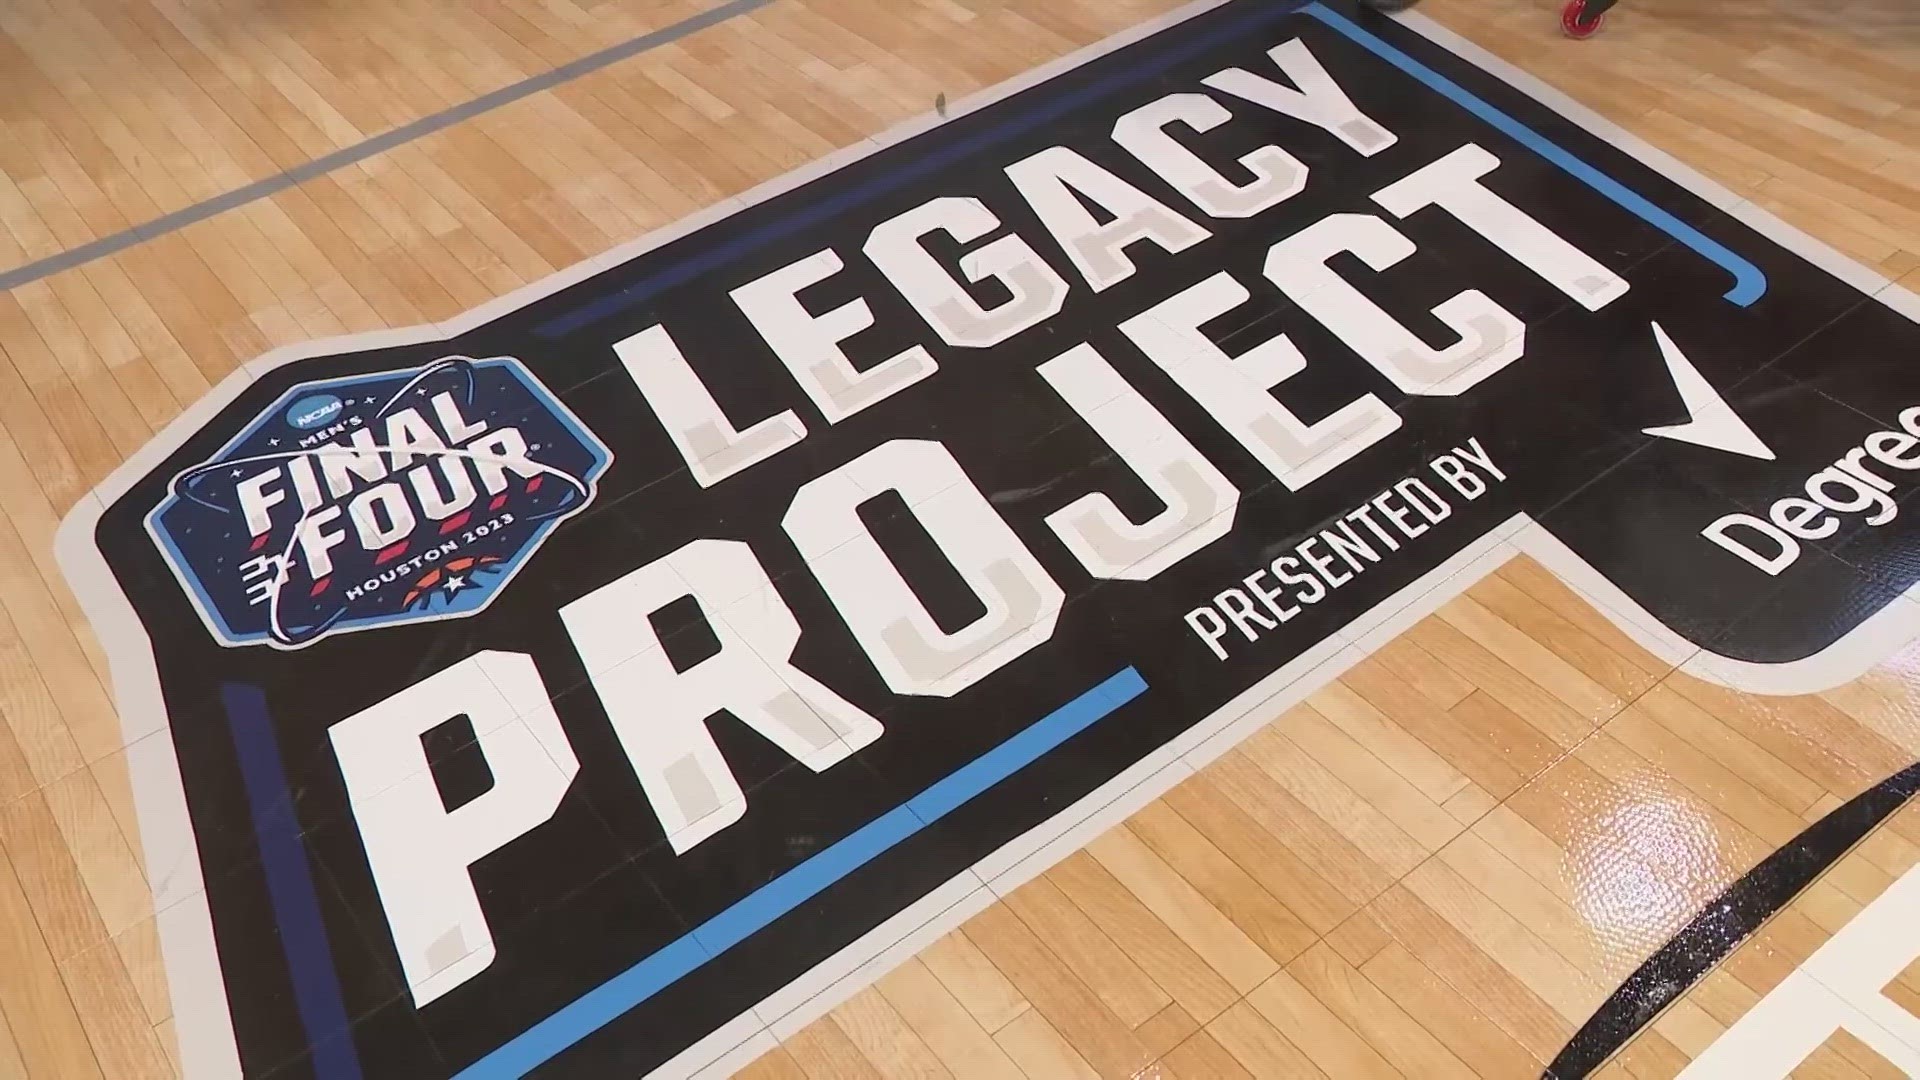 The Legacy Project included a $100,000 renovation of the Blue Triangle Community Center gymnasium.